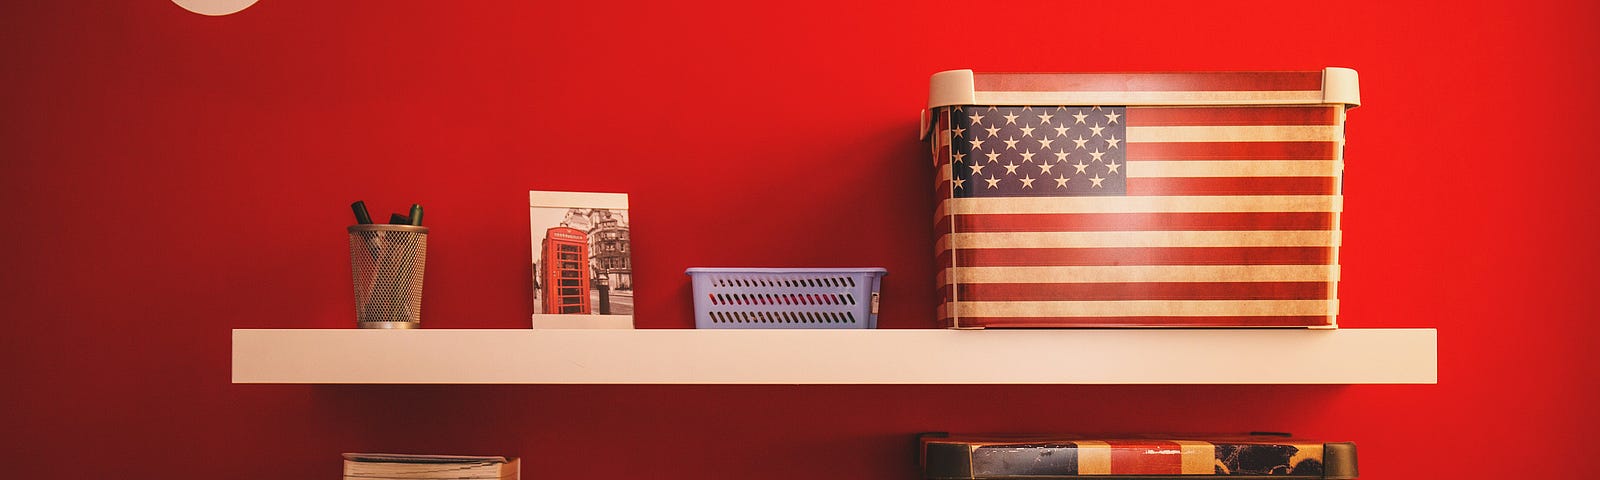 Two boxes on shelves. One with American flag, the other with British flag.